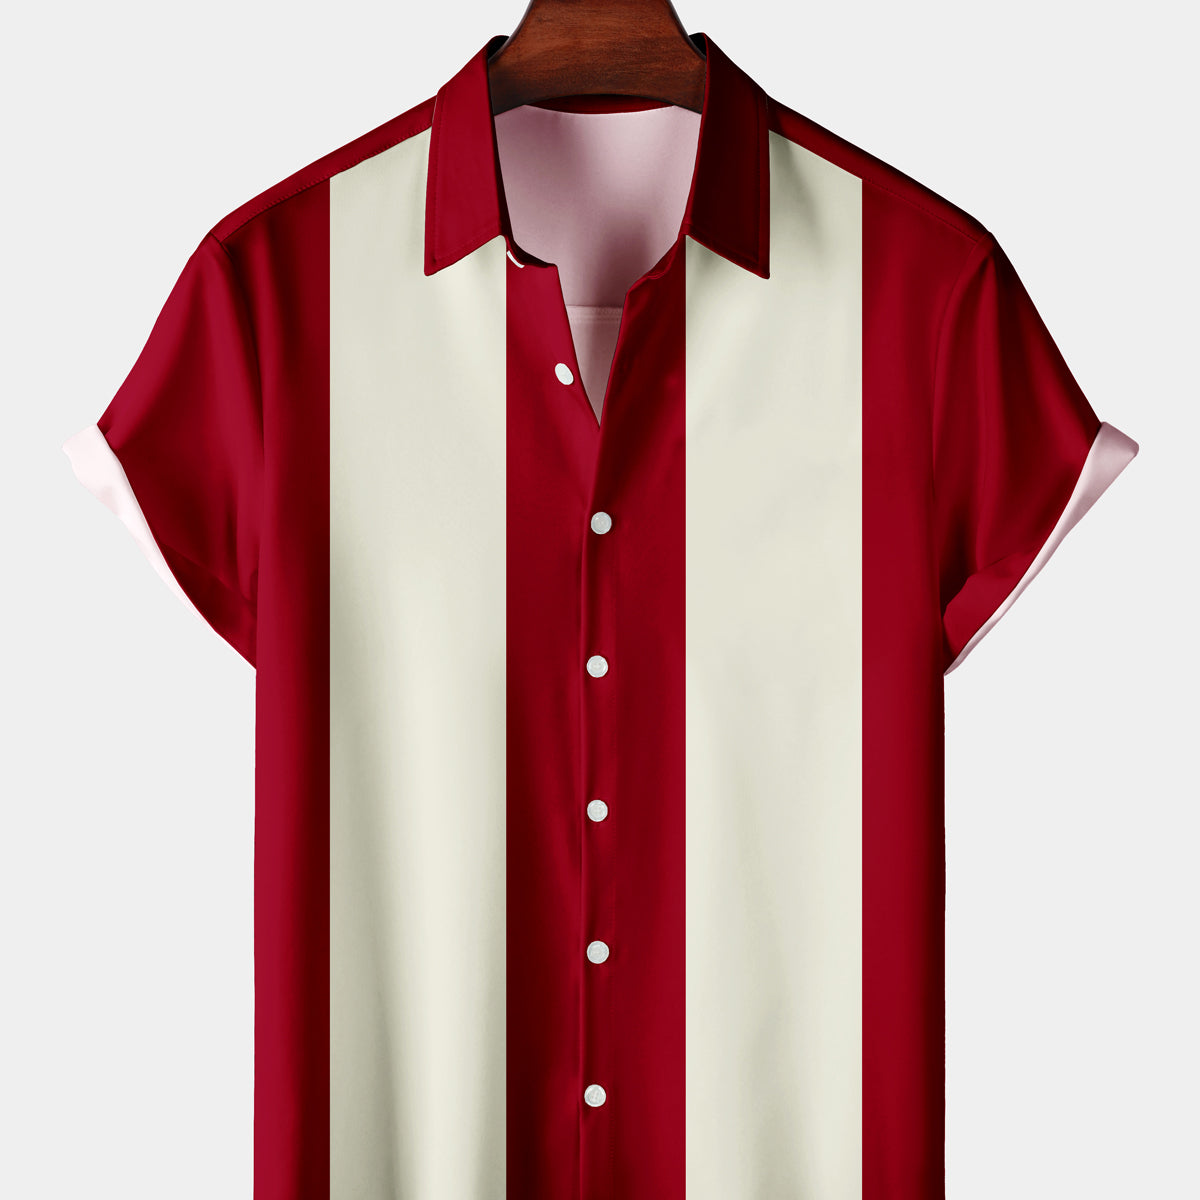 Men's Casual Red And White Stitching Short Sleeve Shirt